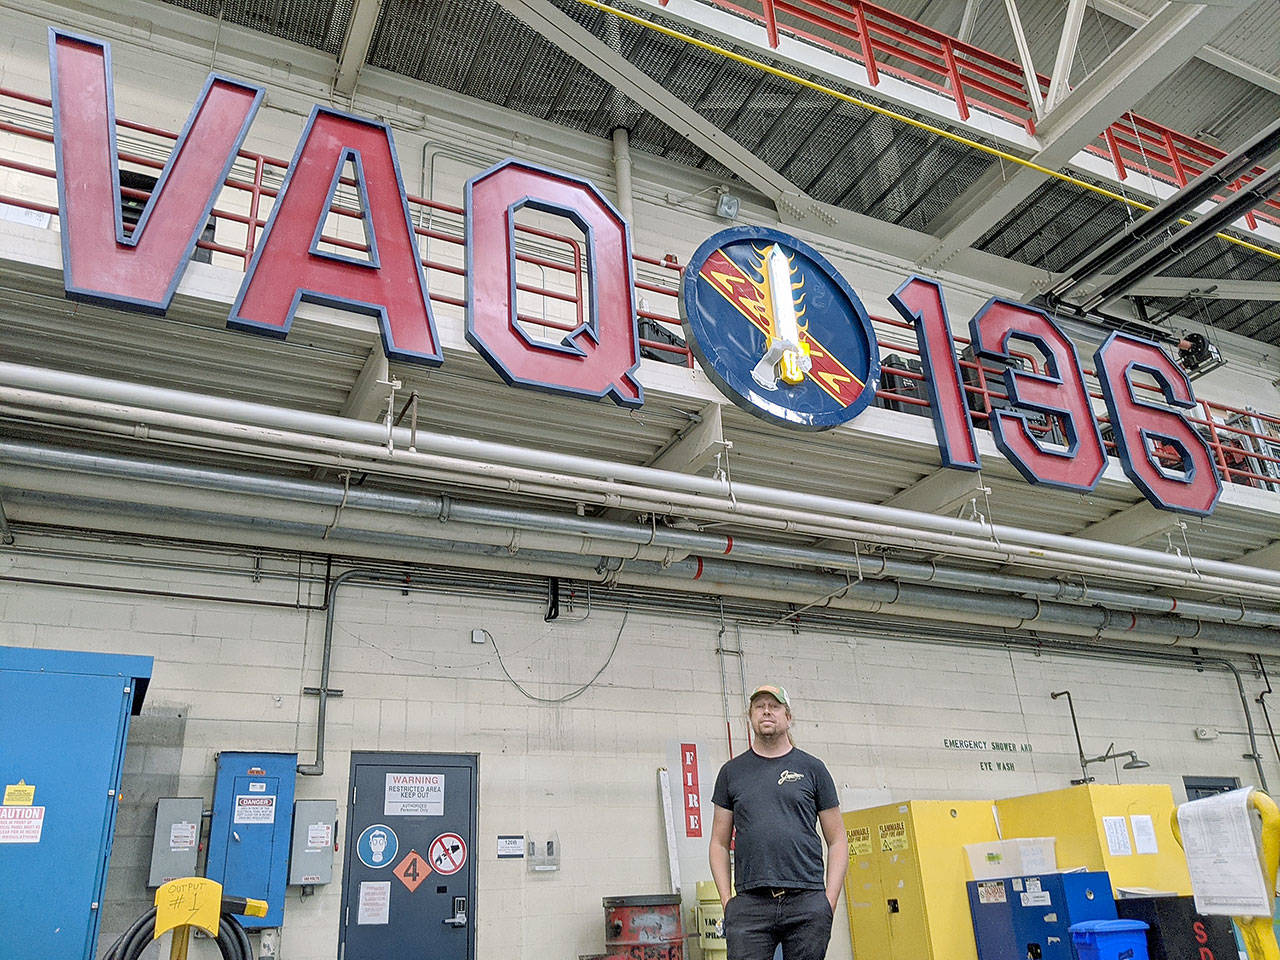 Photo provided
Langley business owner Tim Leonard stands below the growler squadron’s completed sign, which includes a sword made of neon. He helped Lt. Cmdr. Ryan Salcido of VAQ-136 to build the sign.